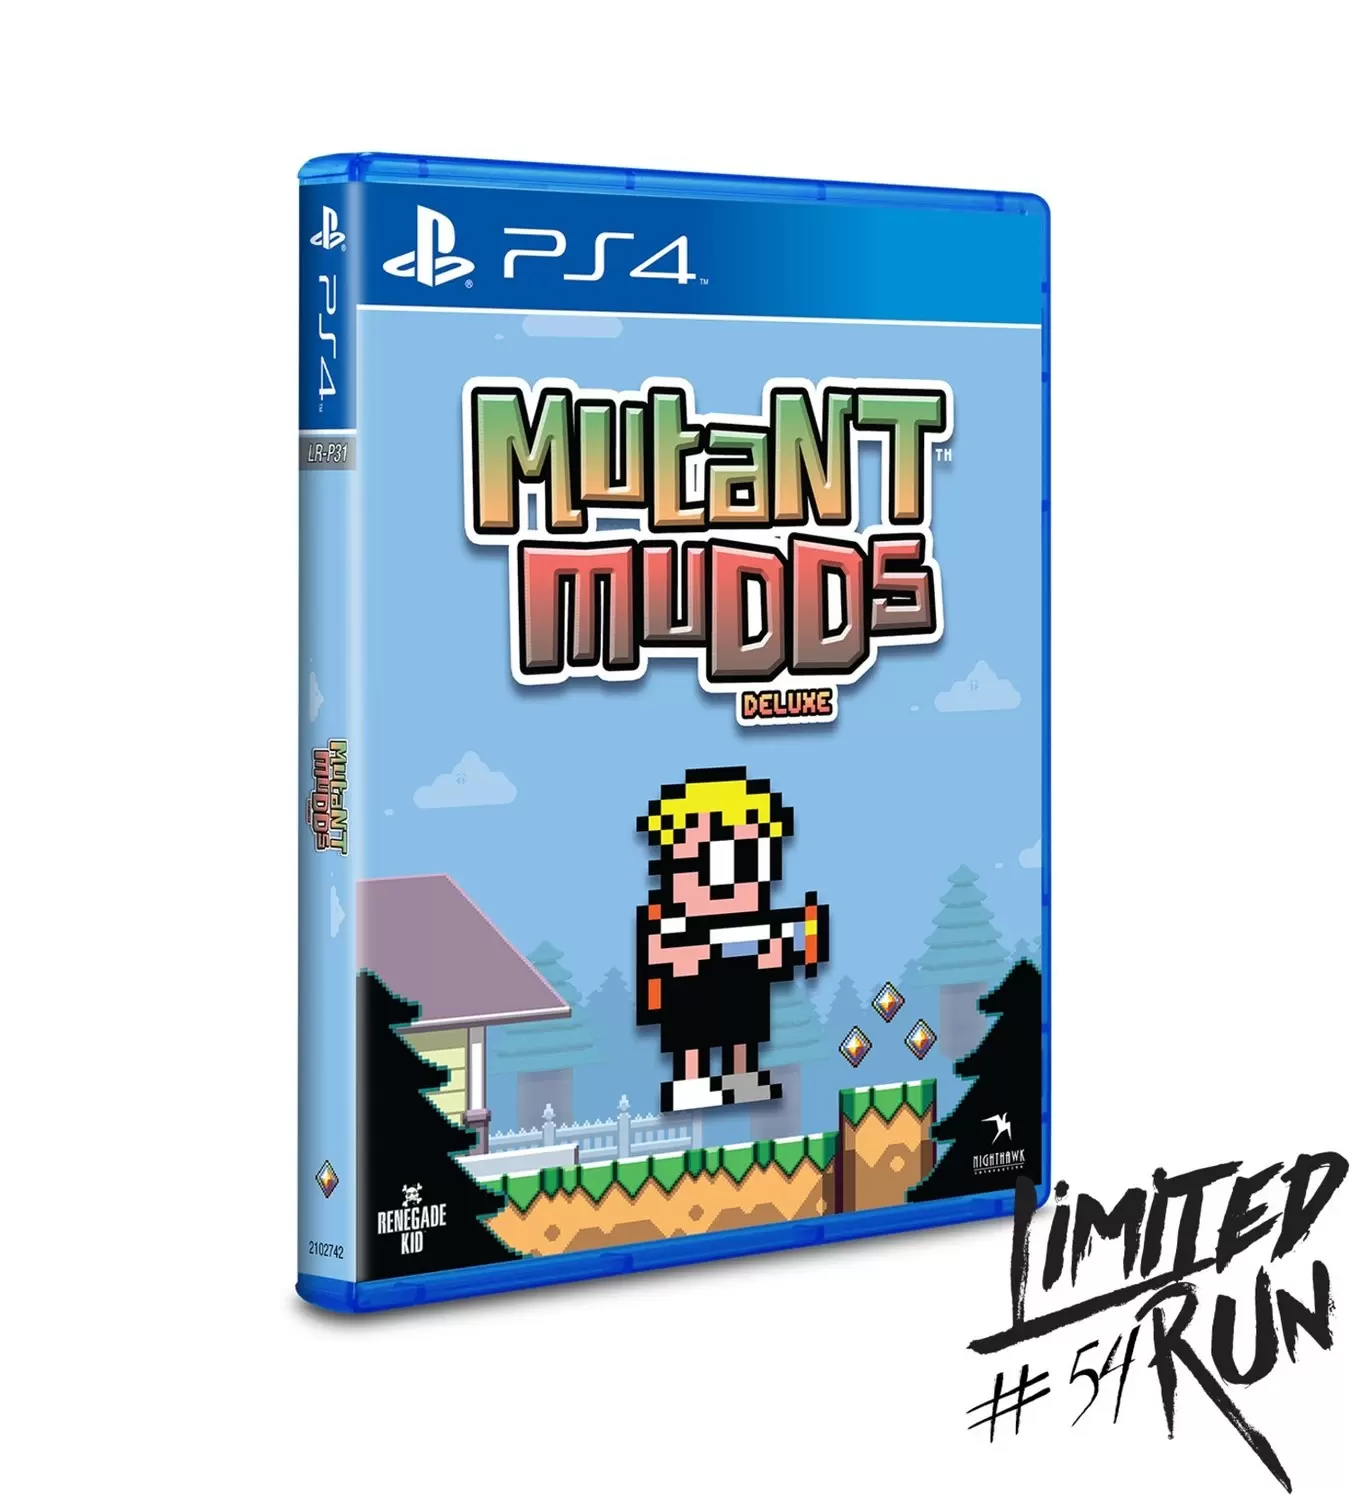 PS4 Games - Mutant Mudds Deluxe